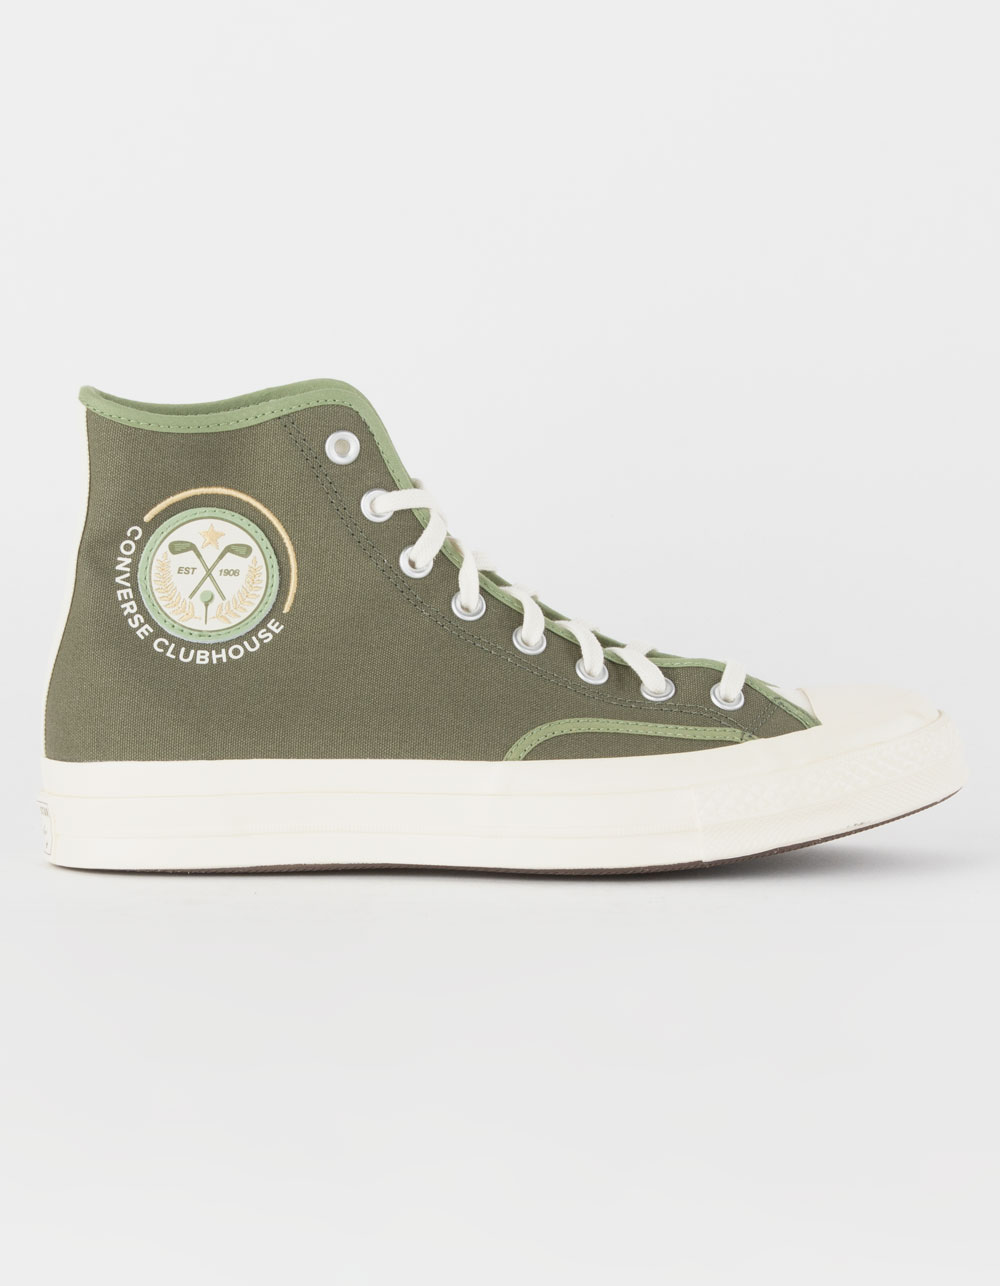 Chuck Taylor All Star Clubhouse Unisex High Top Shoe.